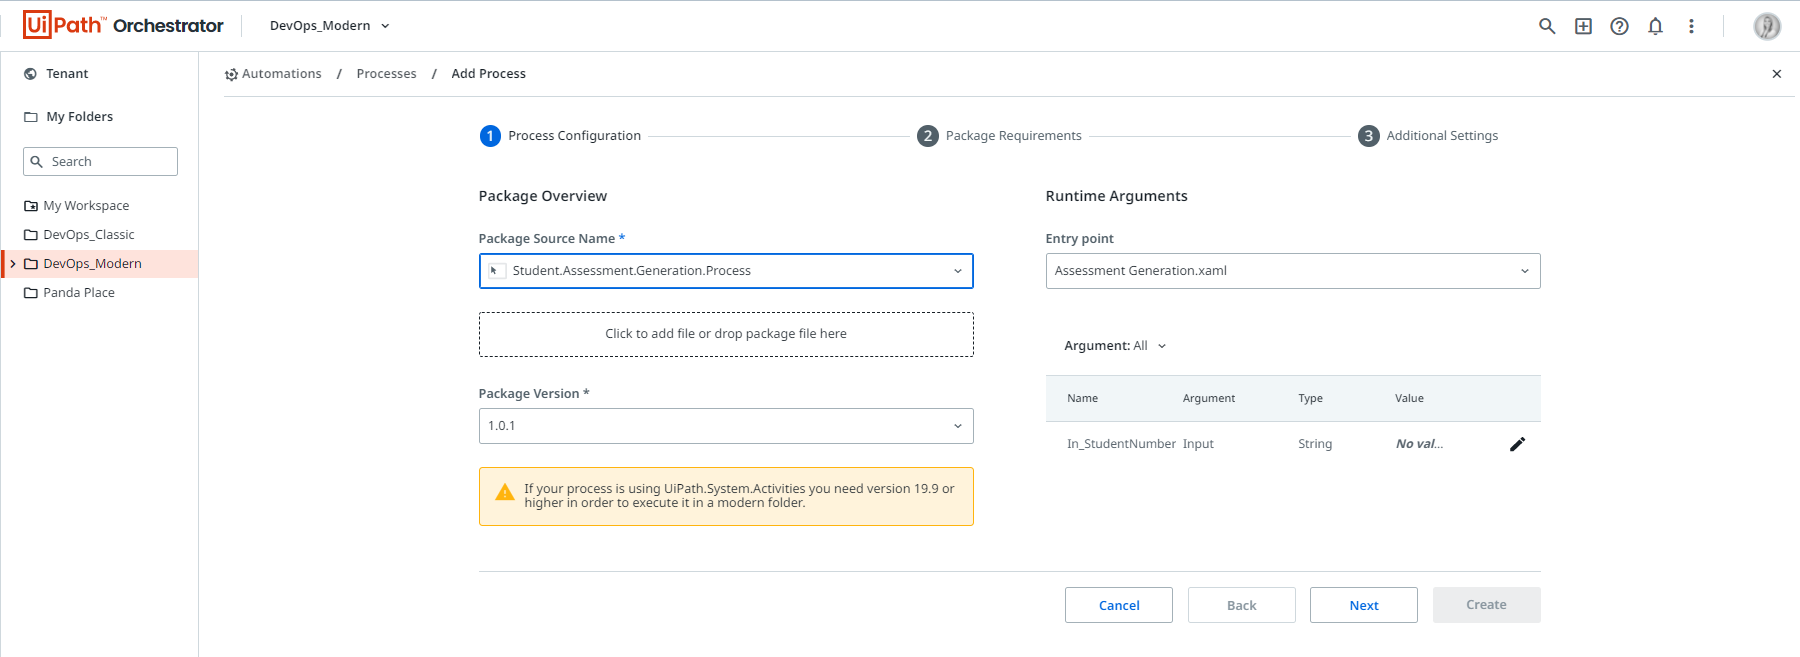 uipath-orchestrator-create-process-from-package